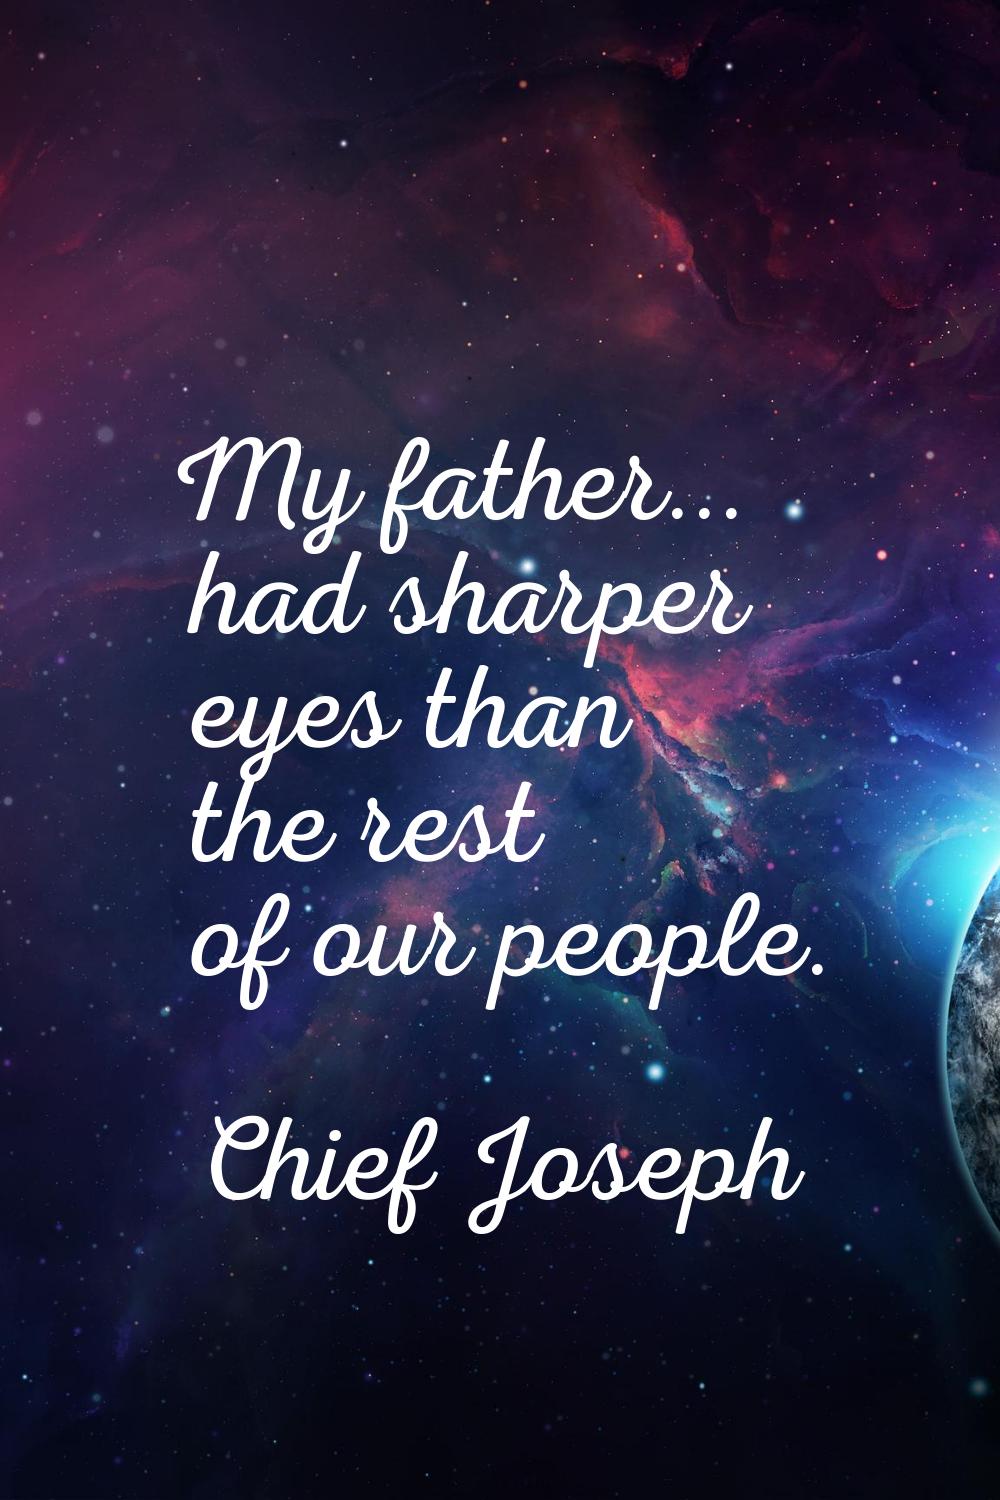 My father... had sharper eyes than the rest of our people.